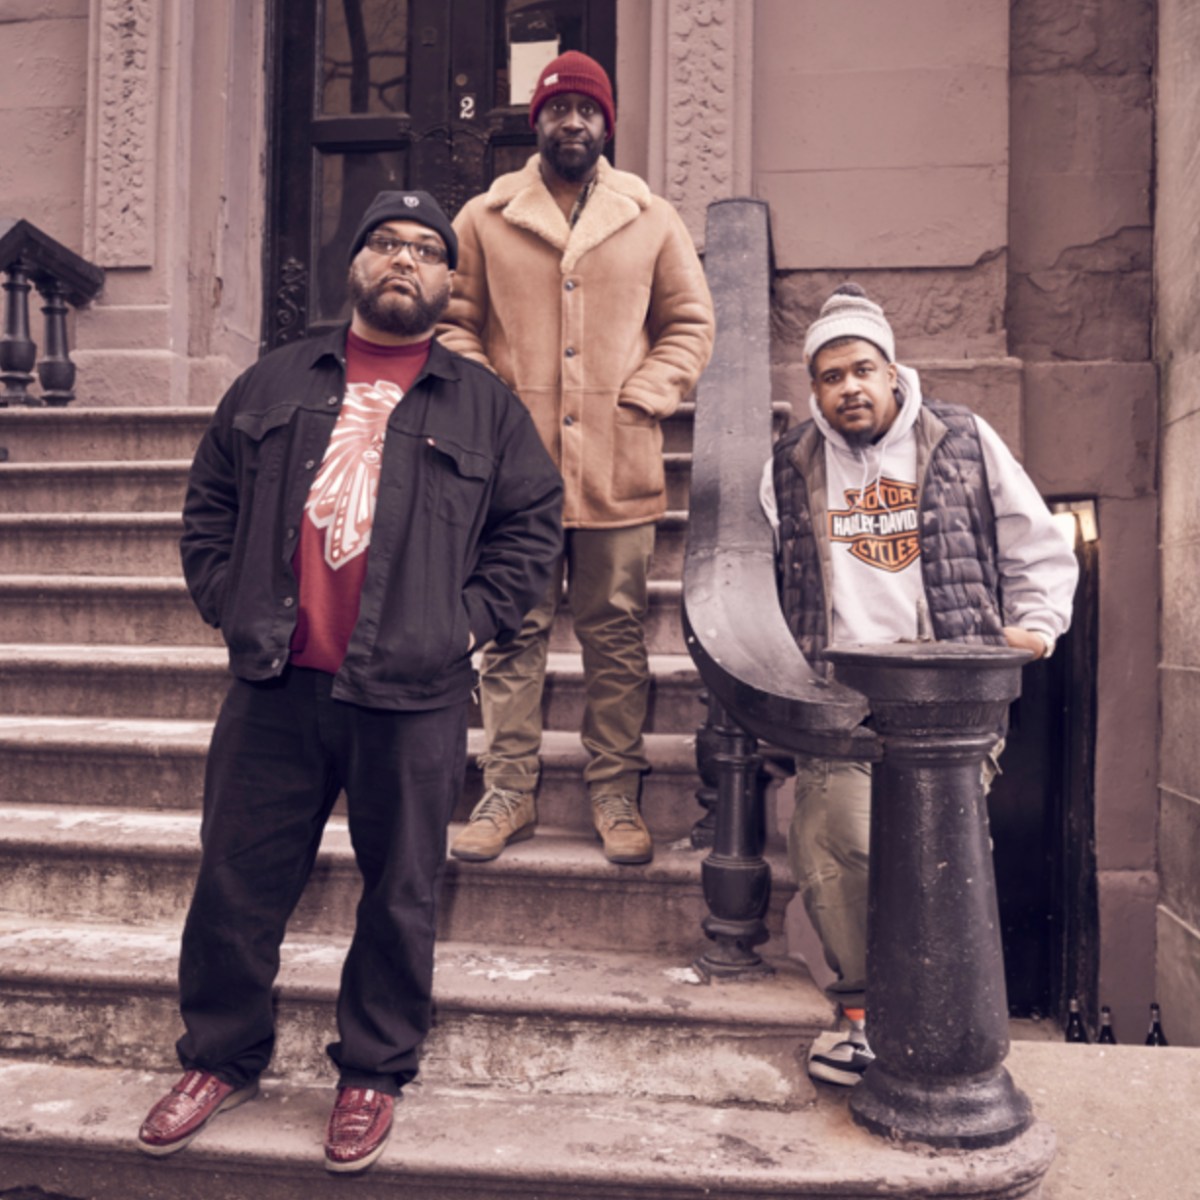 De La Soul Discusses Their Legacy With Ebro – COOL HUNTING®